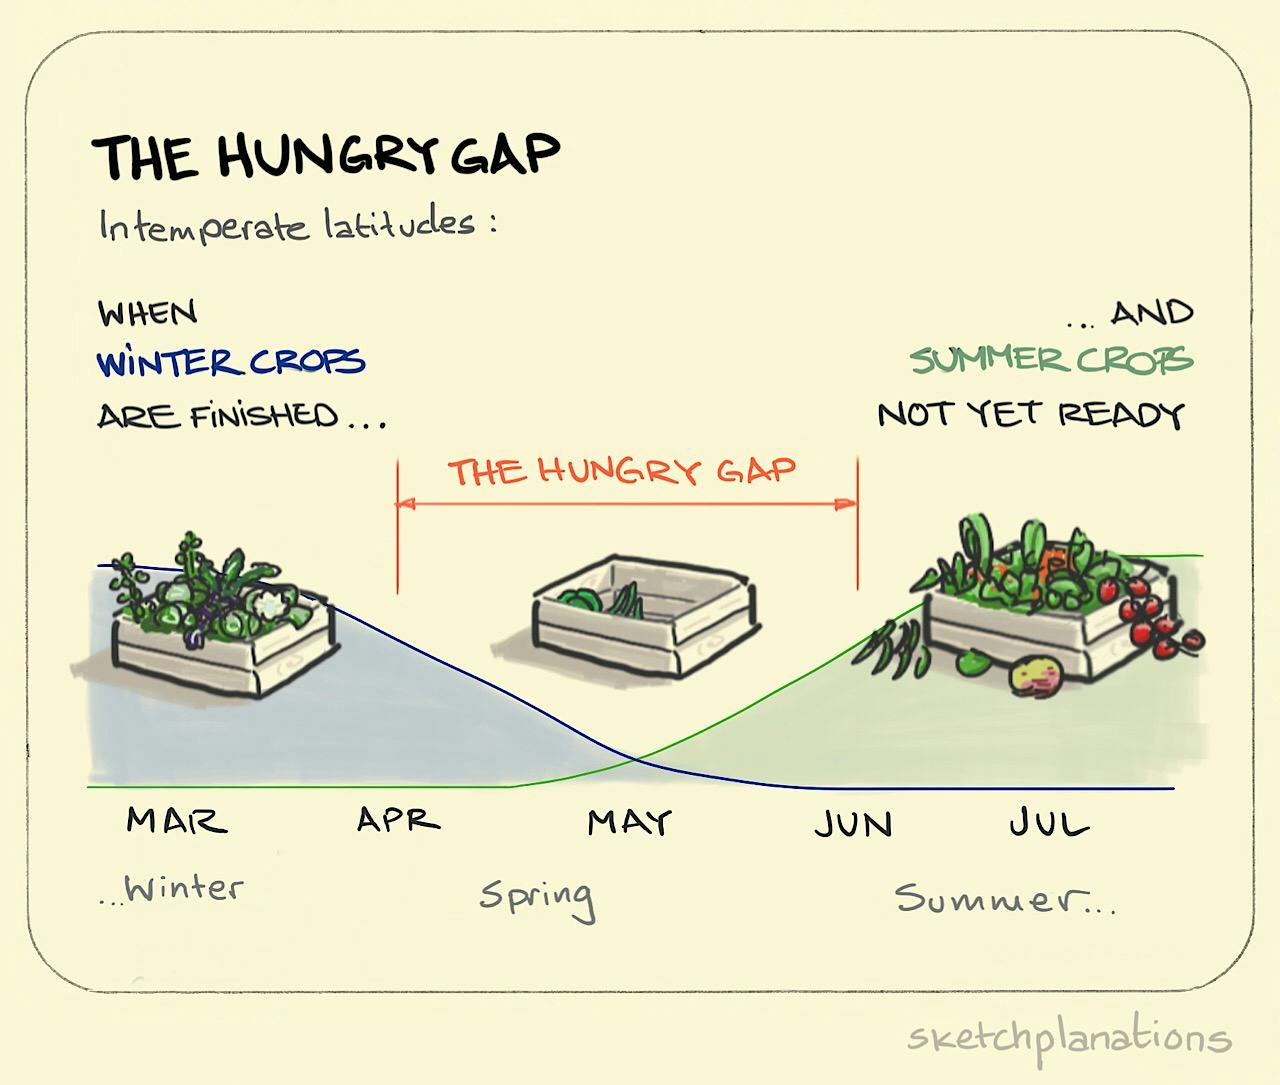 The Hungry Gap - Sketchplanations